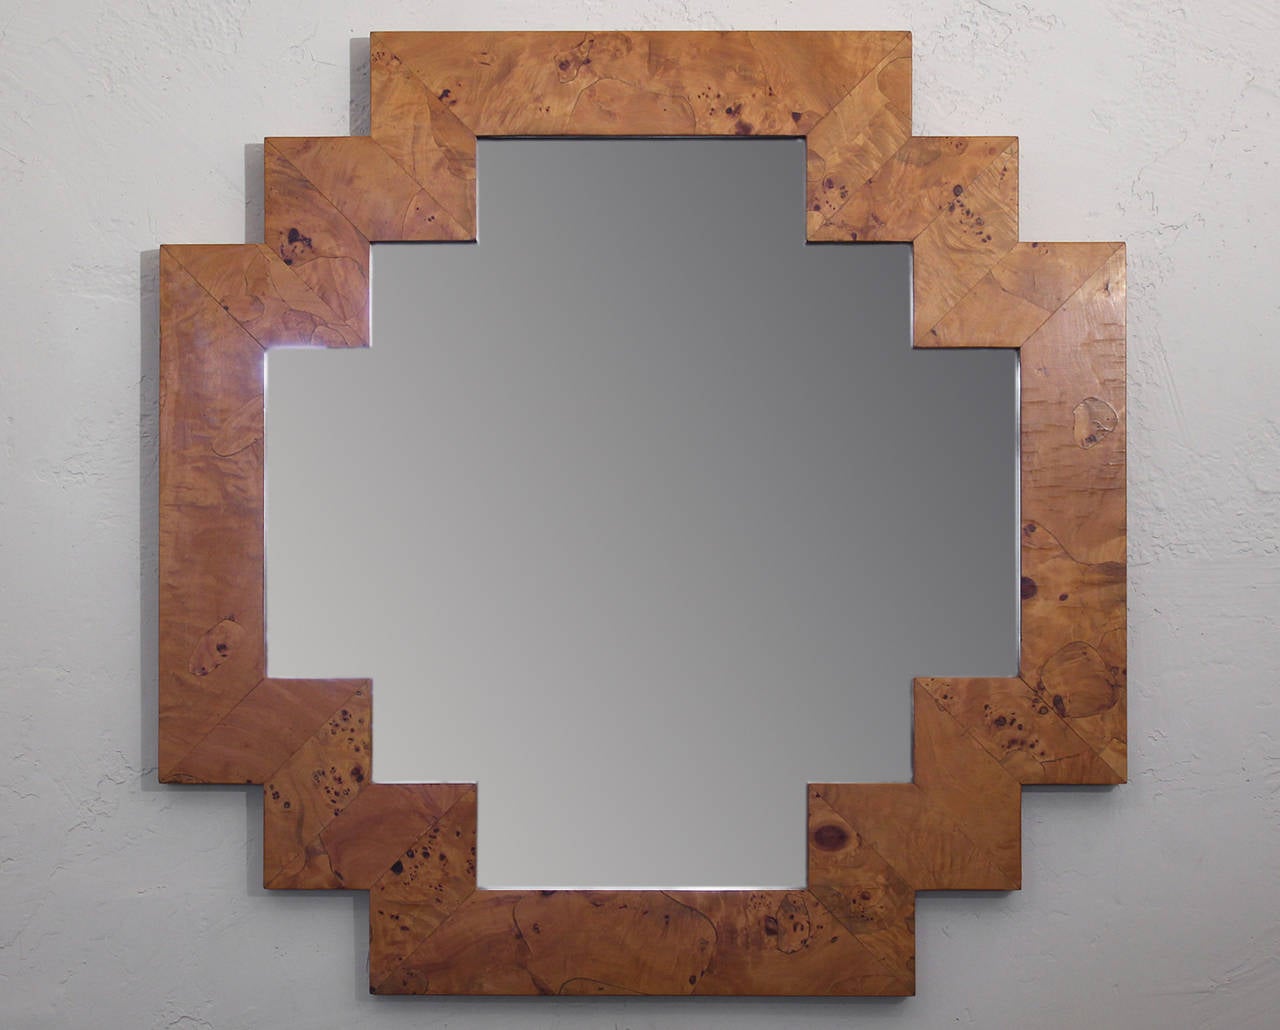 Art Deco style wall hanging mirror with a wonderful burl wood geometric frame. Made in Italy. Excellent vintage all-original condition with original finish.